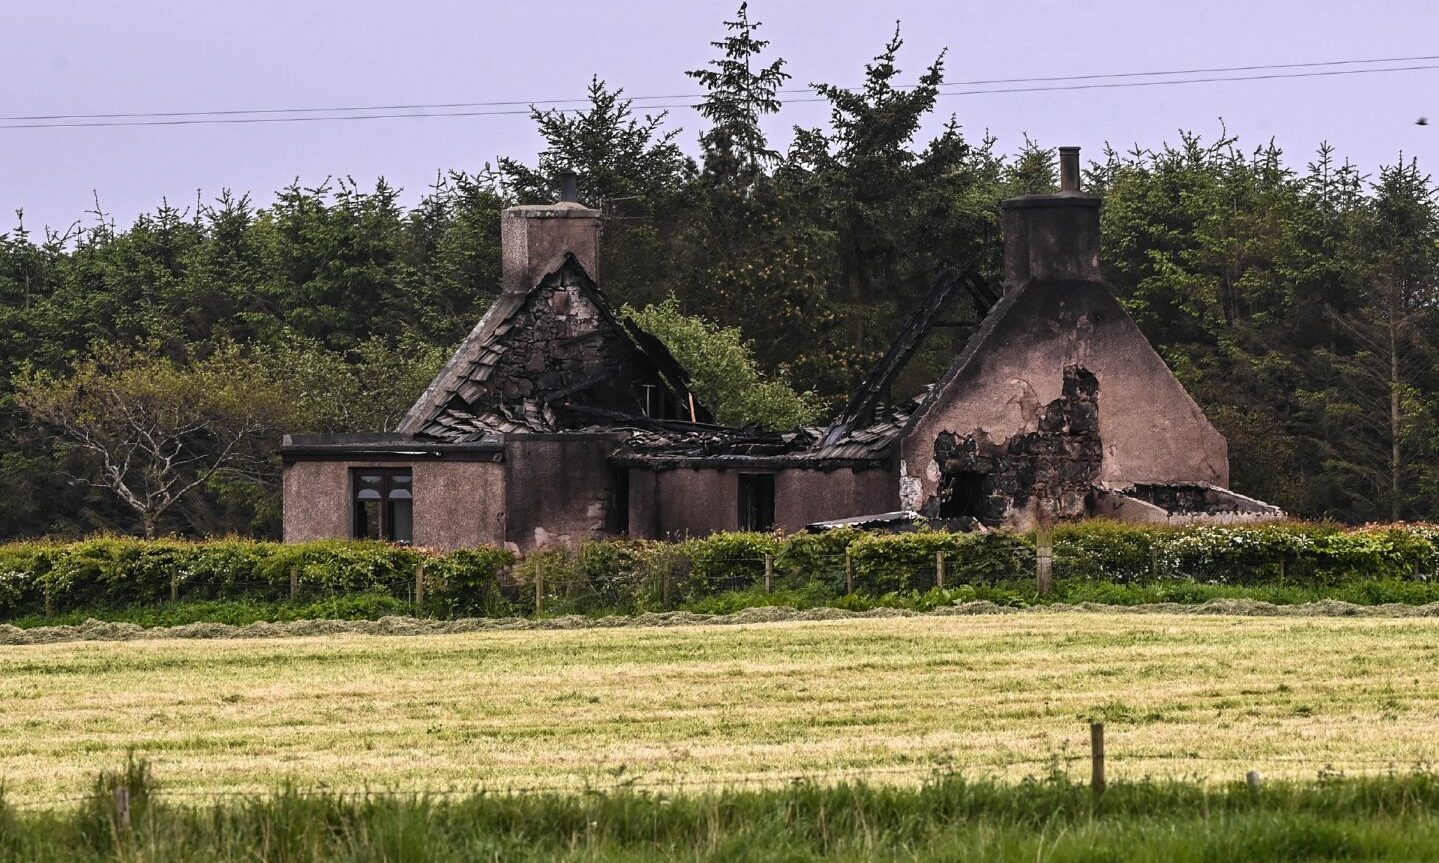 The ruined cottage in a rural setting with a field in the foreground. 